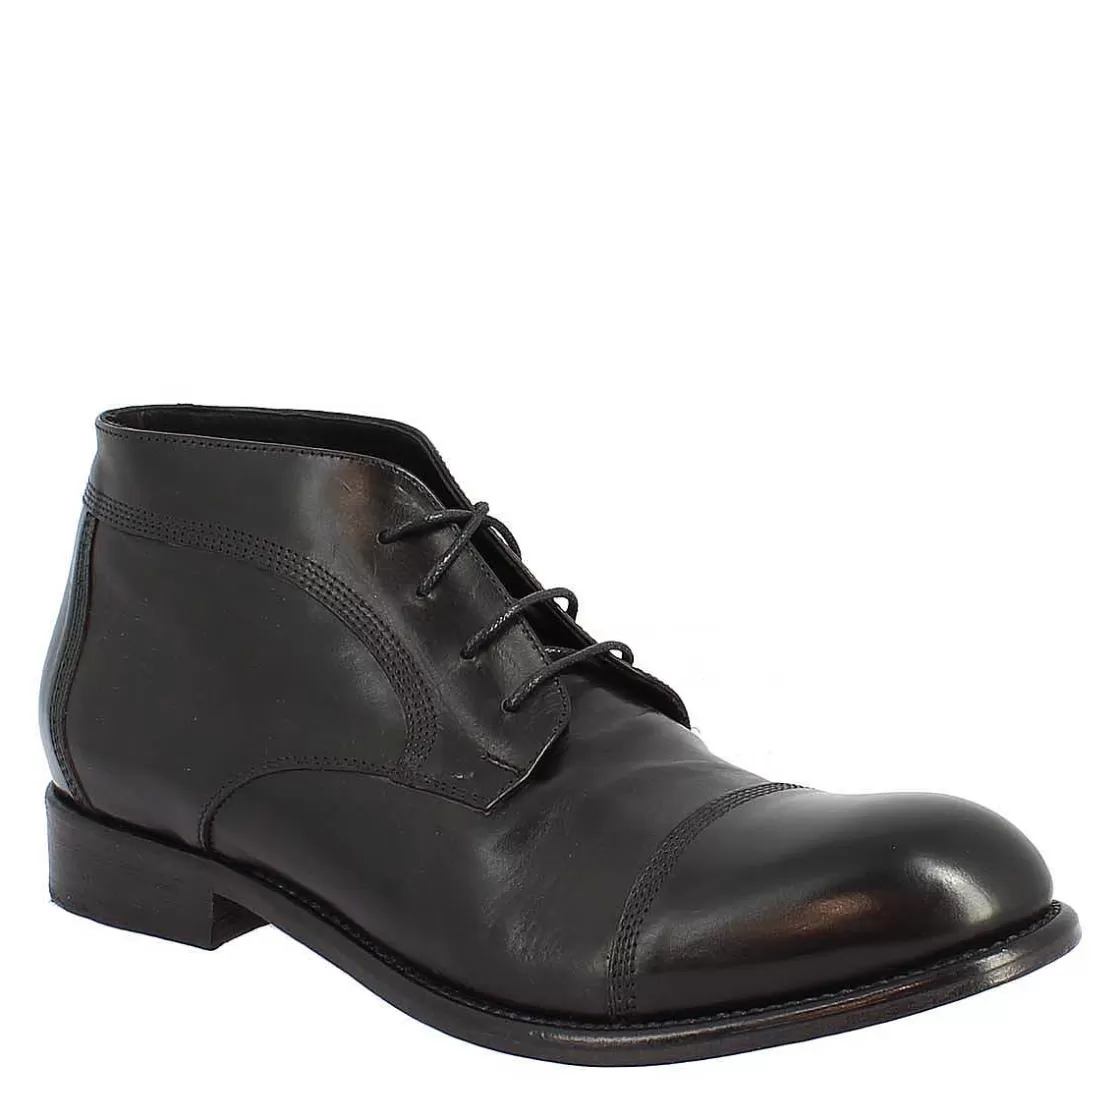 Leonardo Men'S Ankle Boot In Black Leather With Leather And Injected Rubber Sole Flash Sale